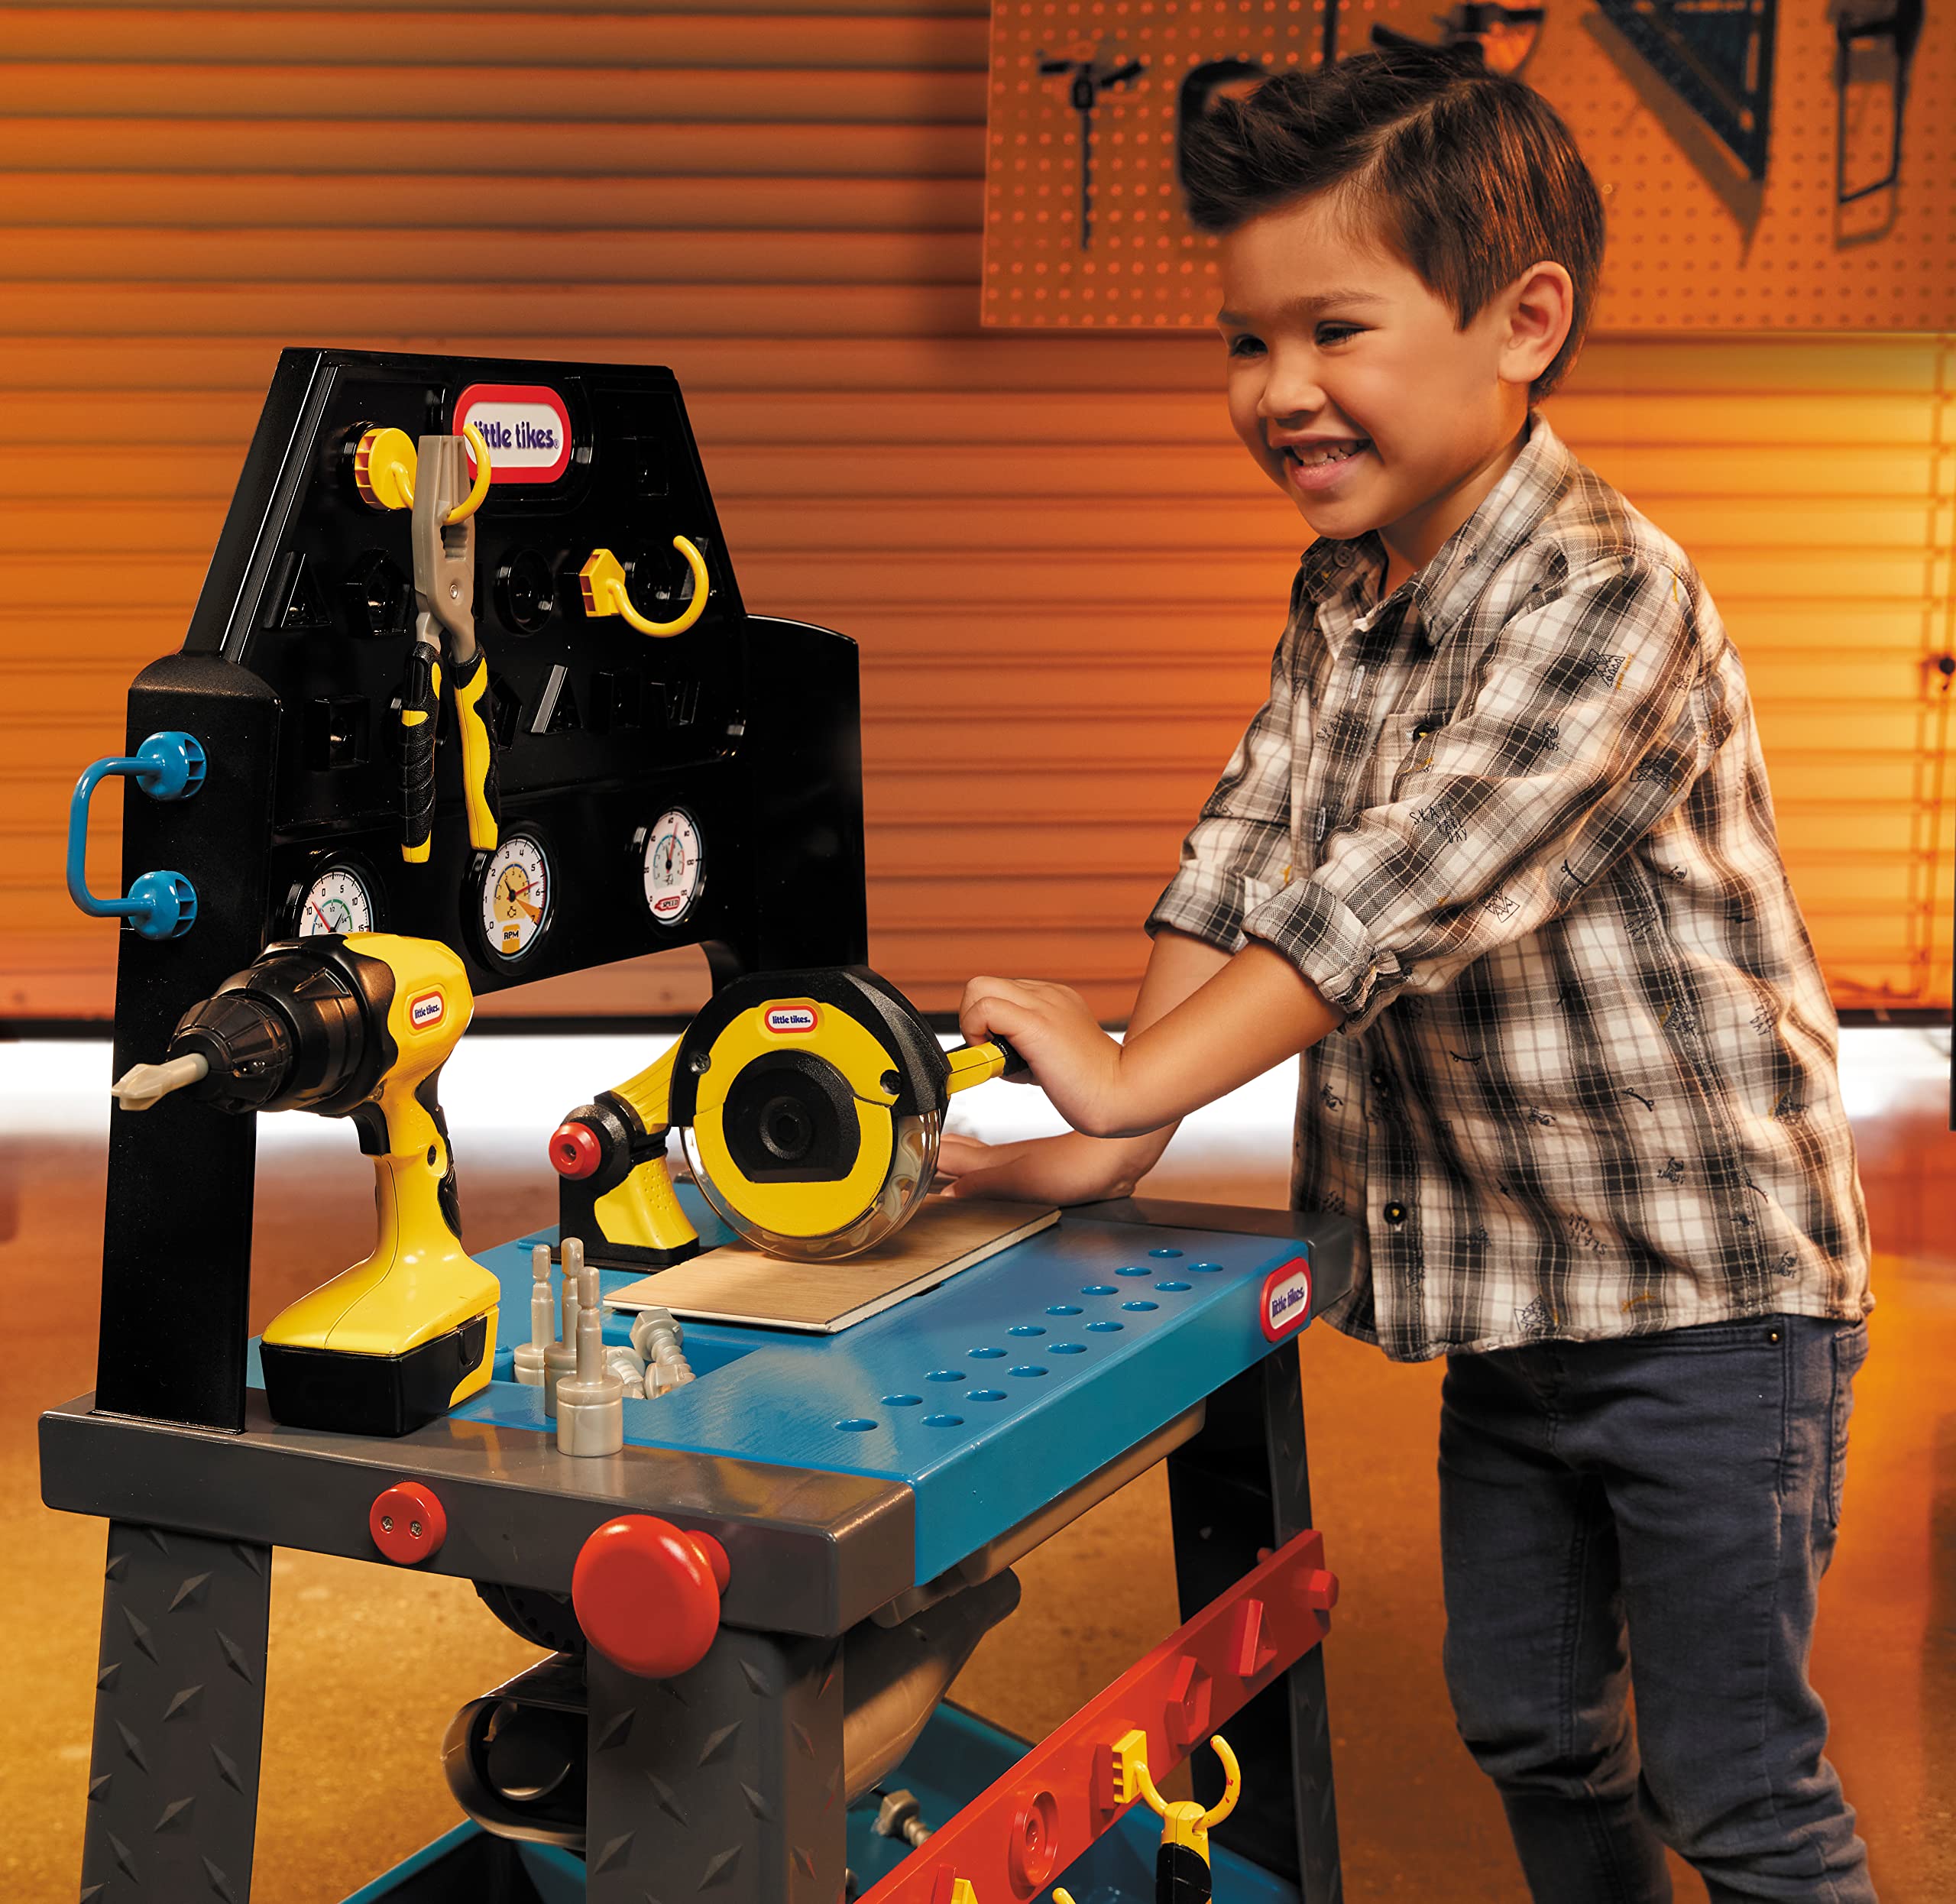 Little Tikes 2-in-1 Buildin' to Learn Motor/Wood Shop Auto and Wood Workshop with 50+ Realistic Accessories Kids 3+